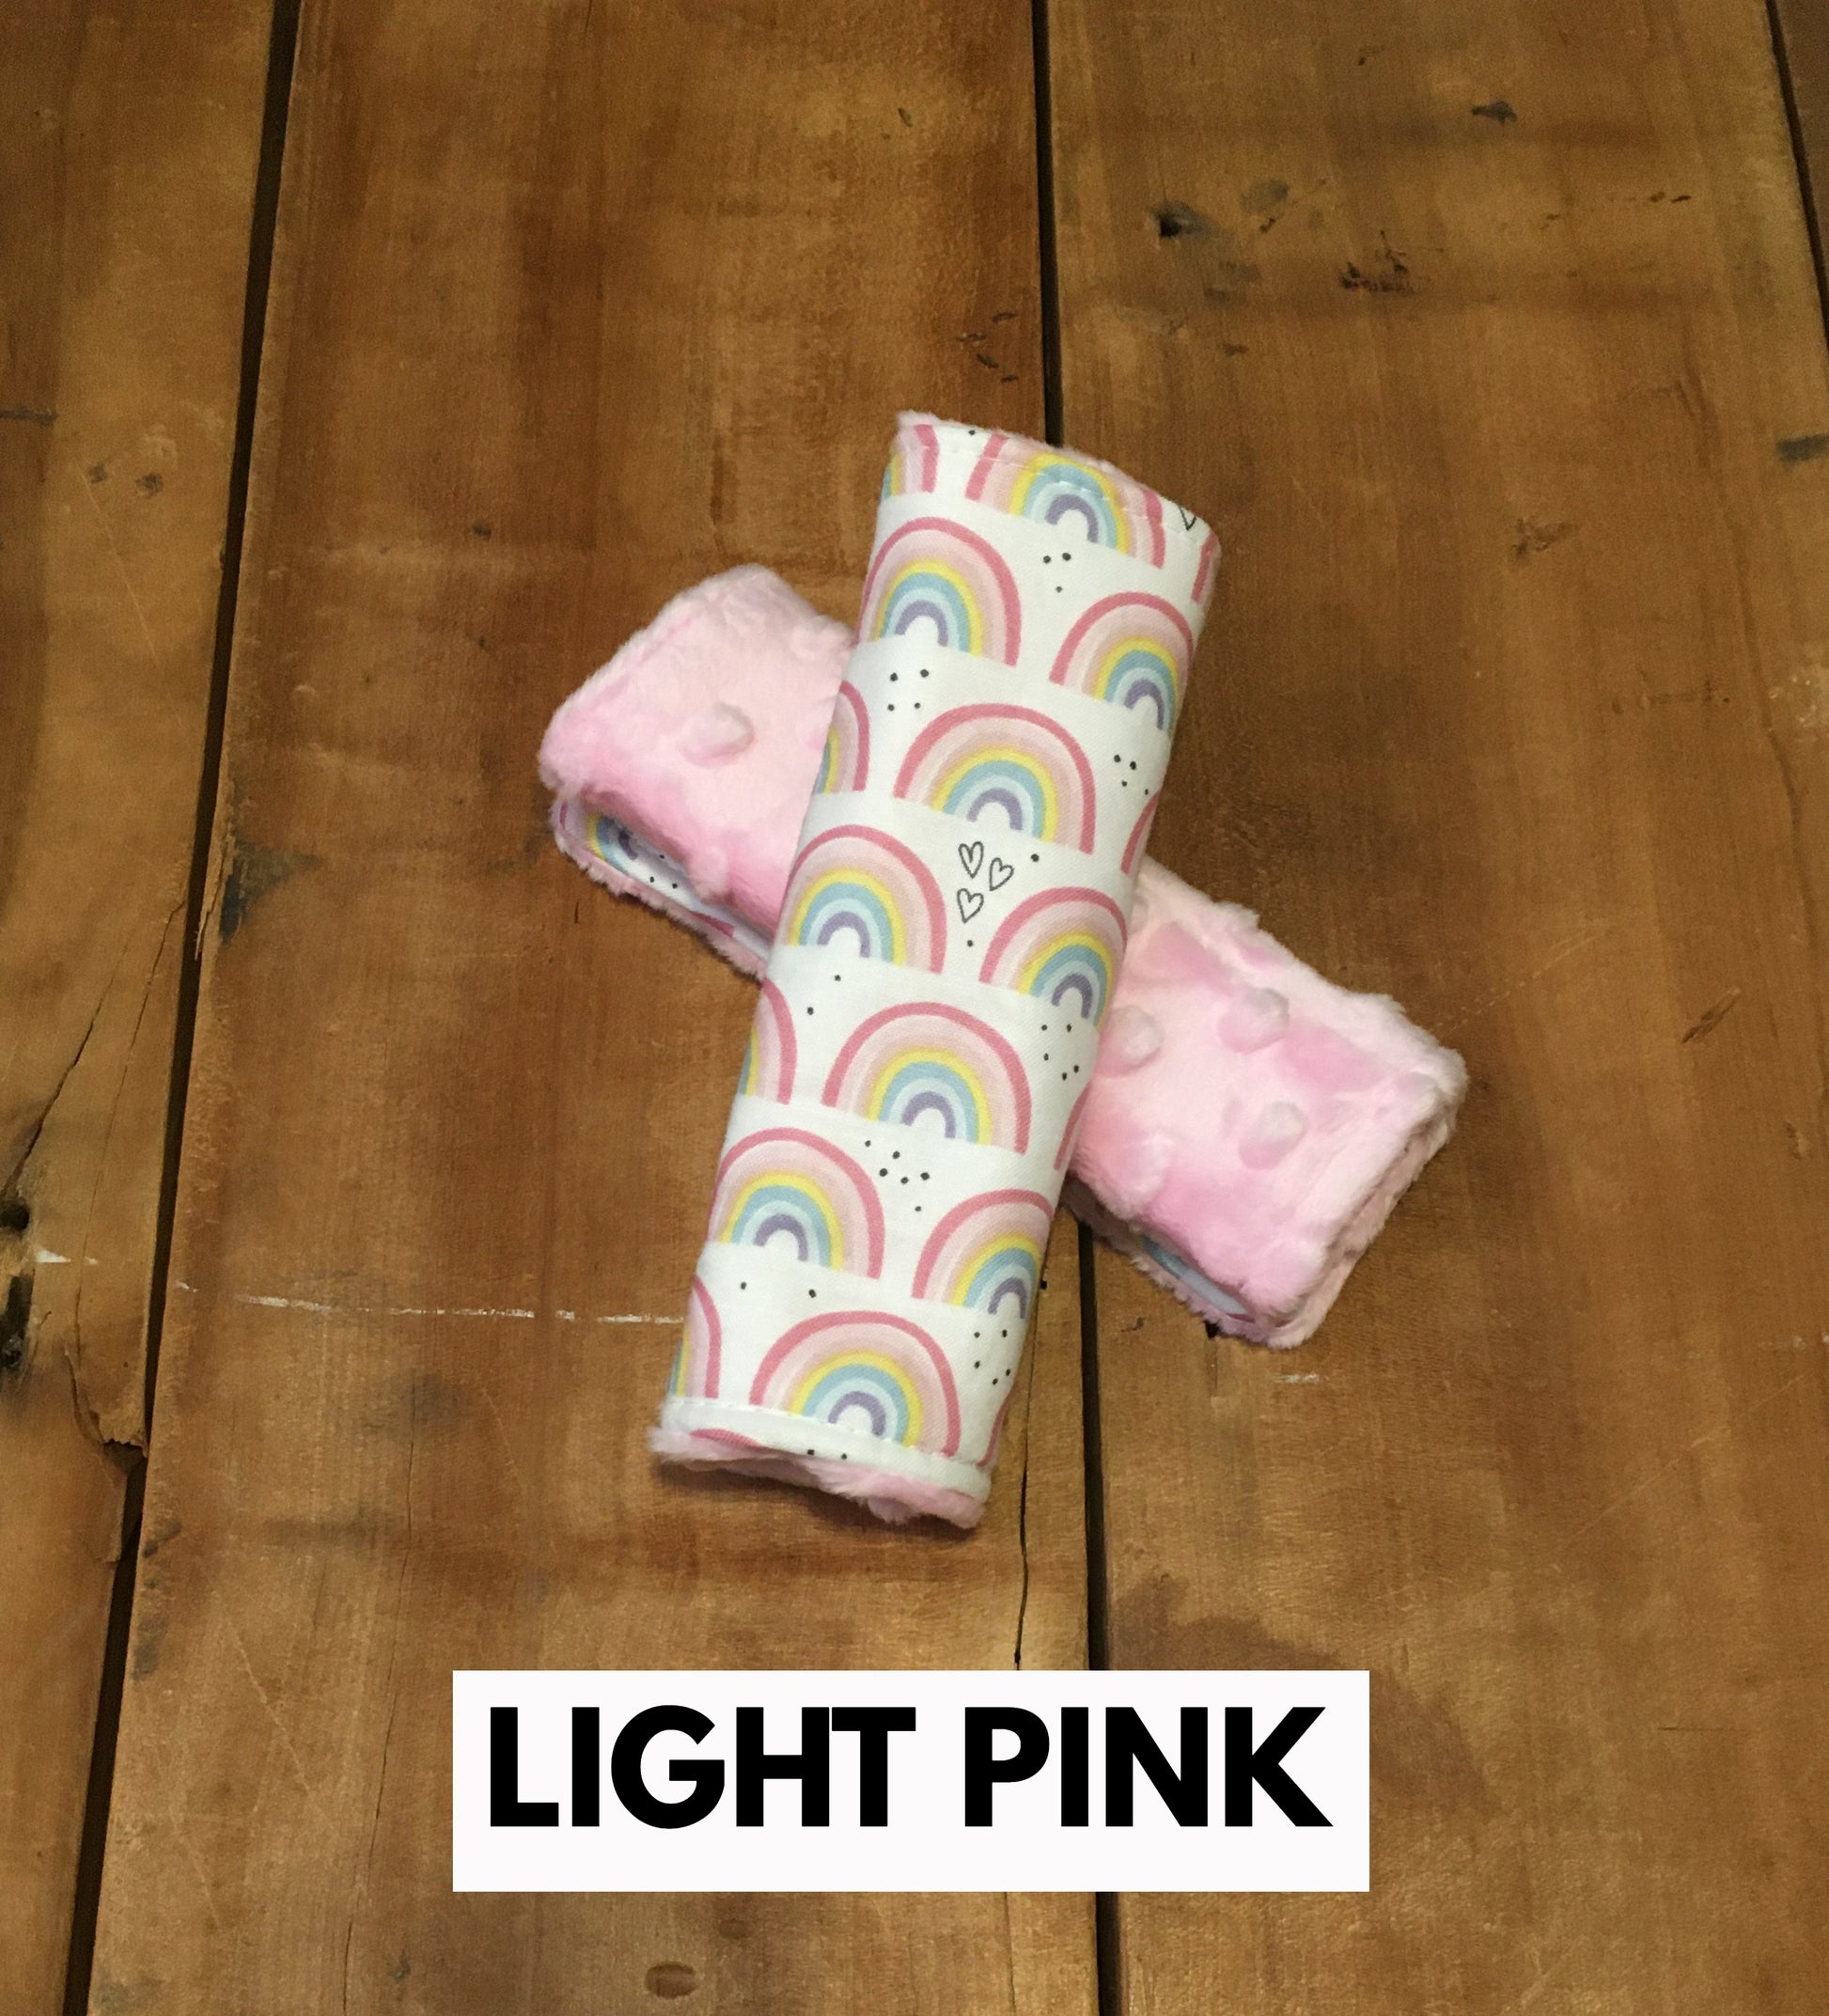 Rainbow car seat strap covers shown in the 6" size with light pink minky back